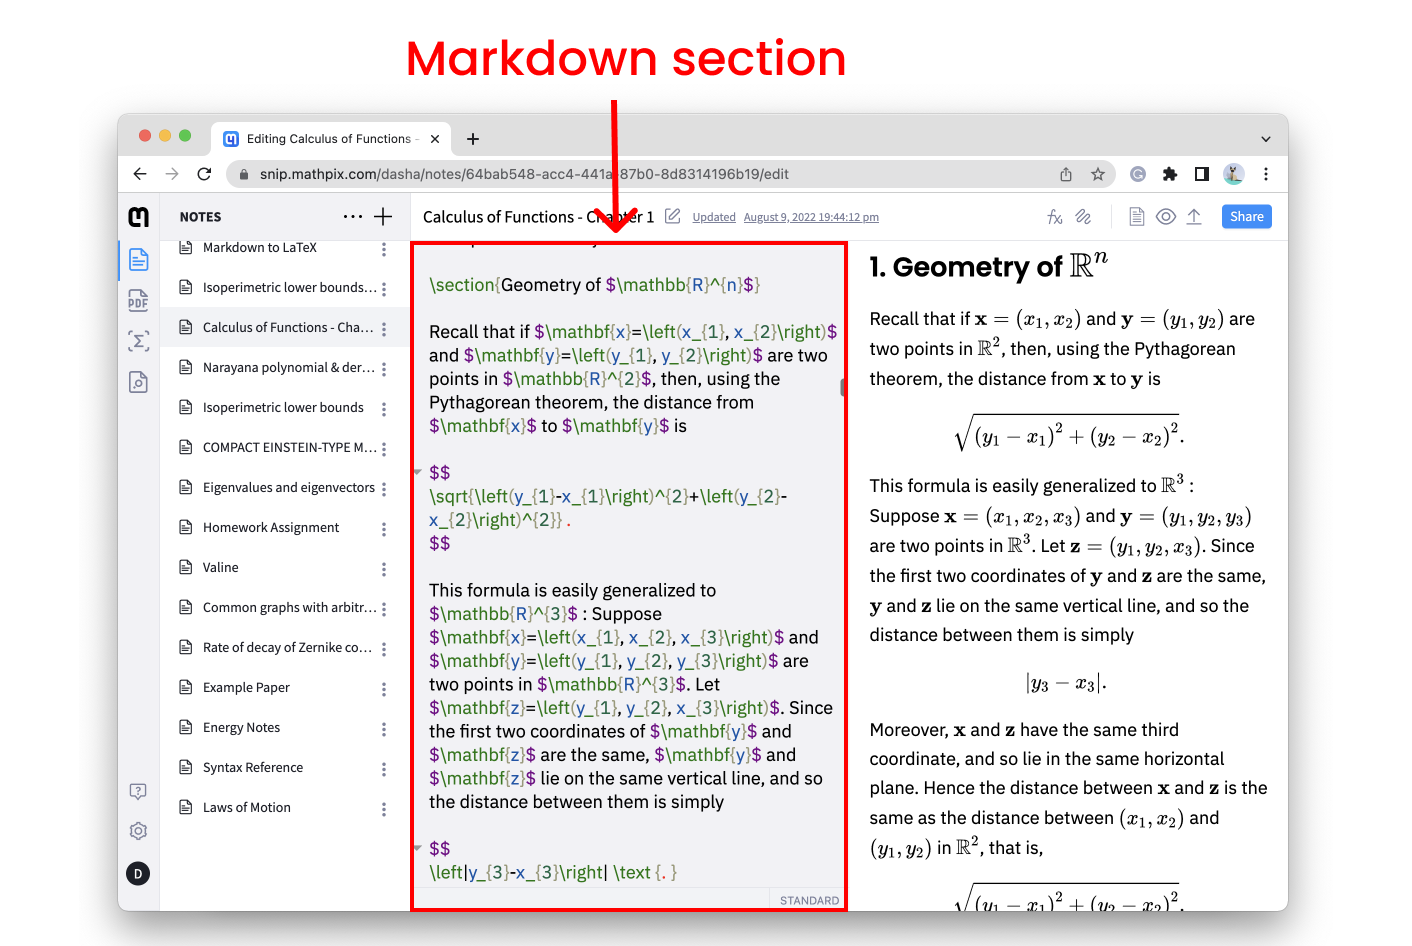 Make edits in Markdown section